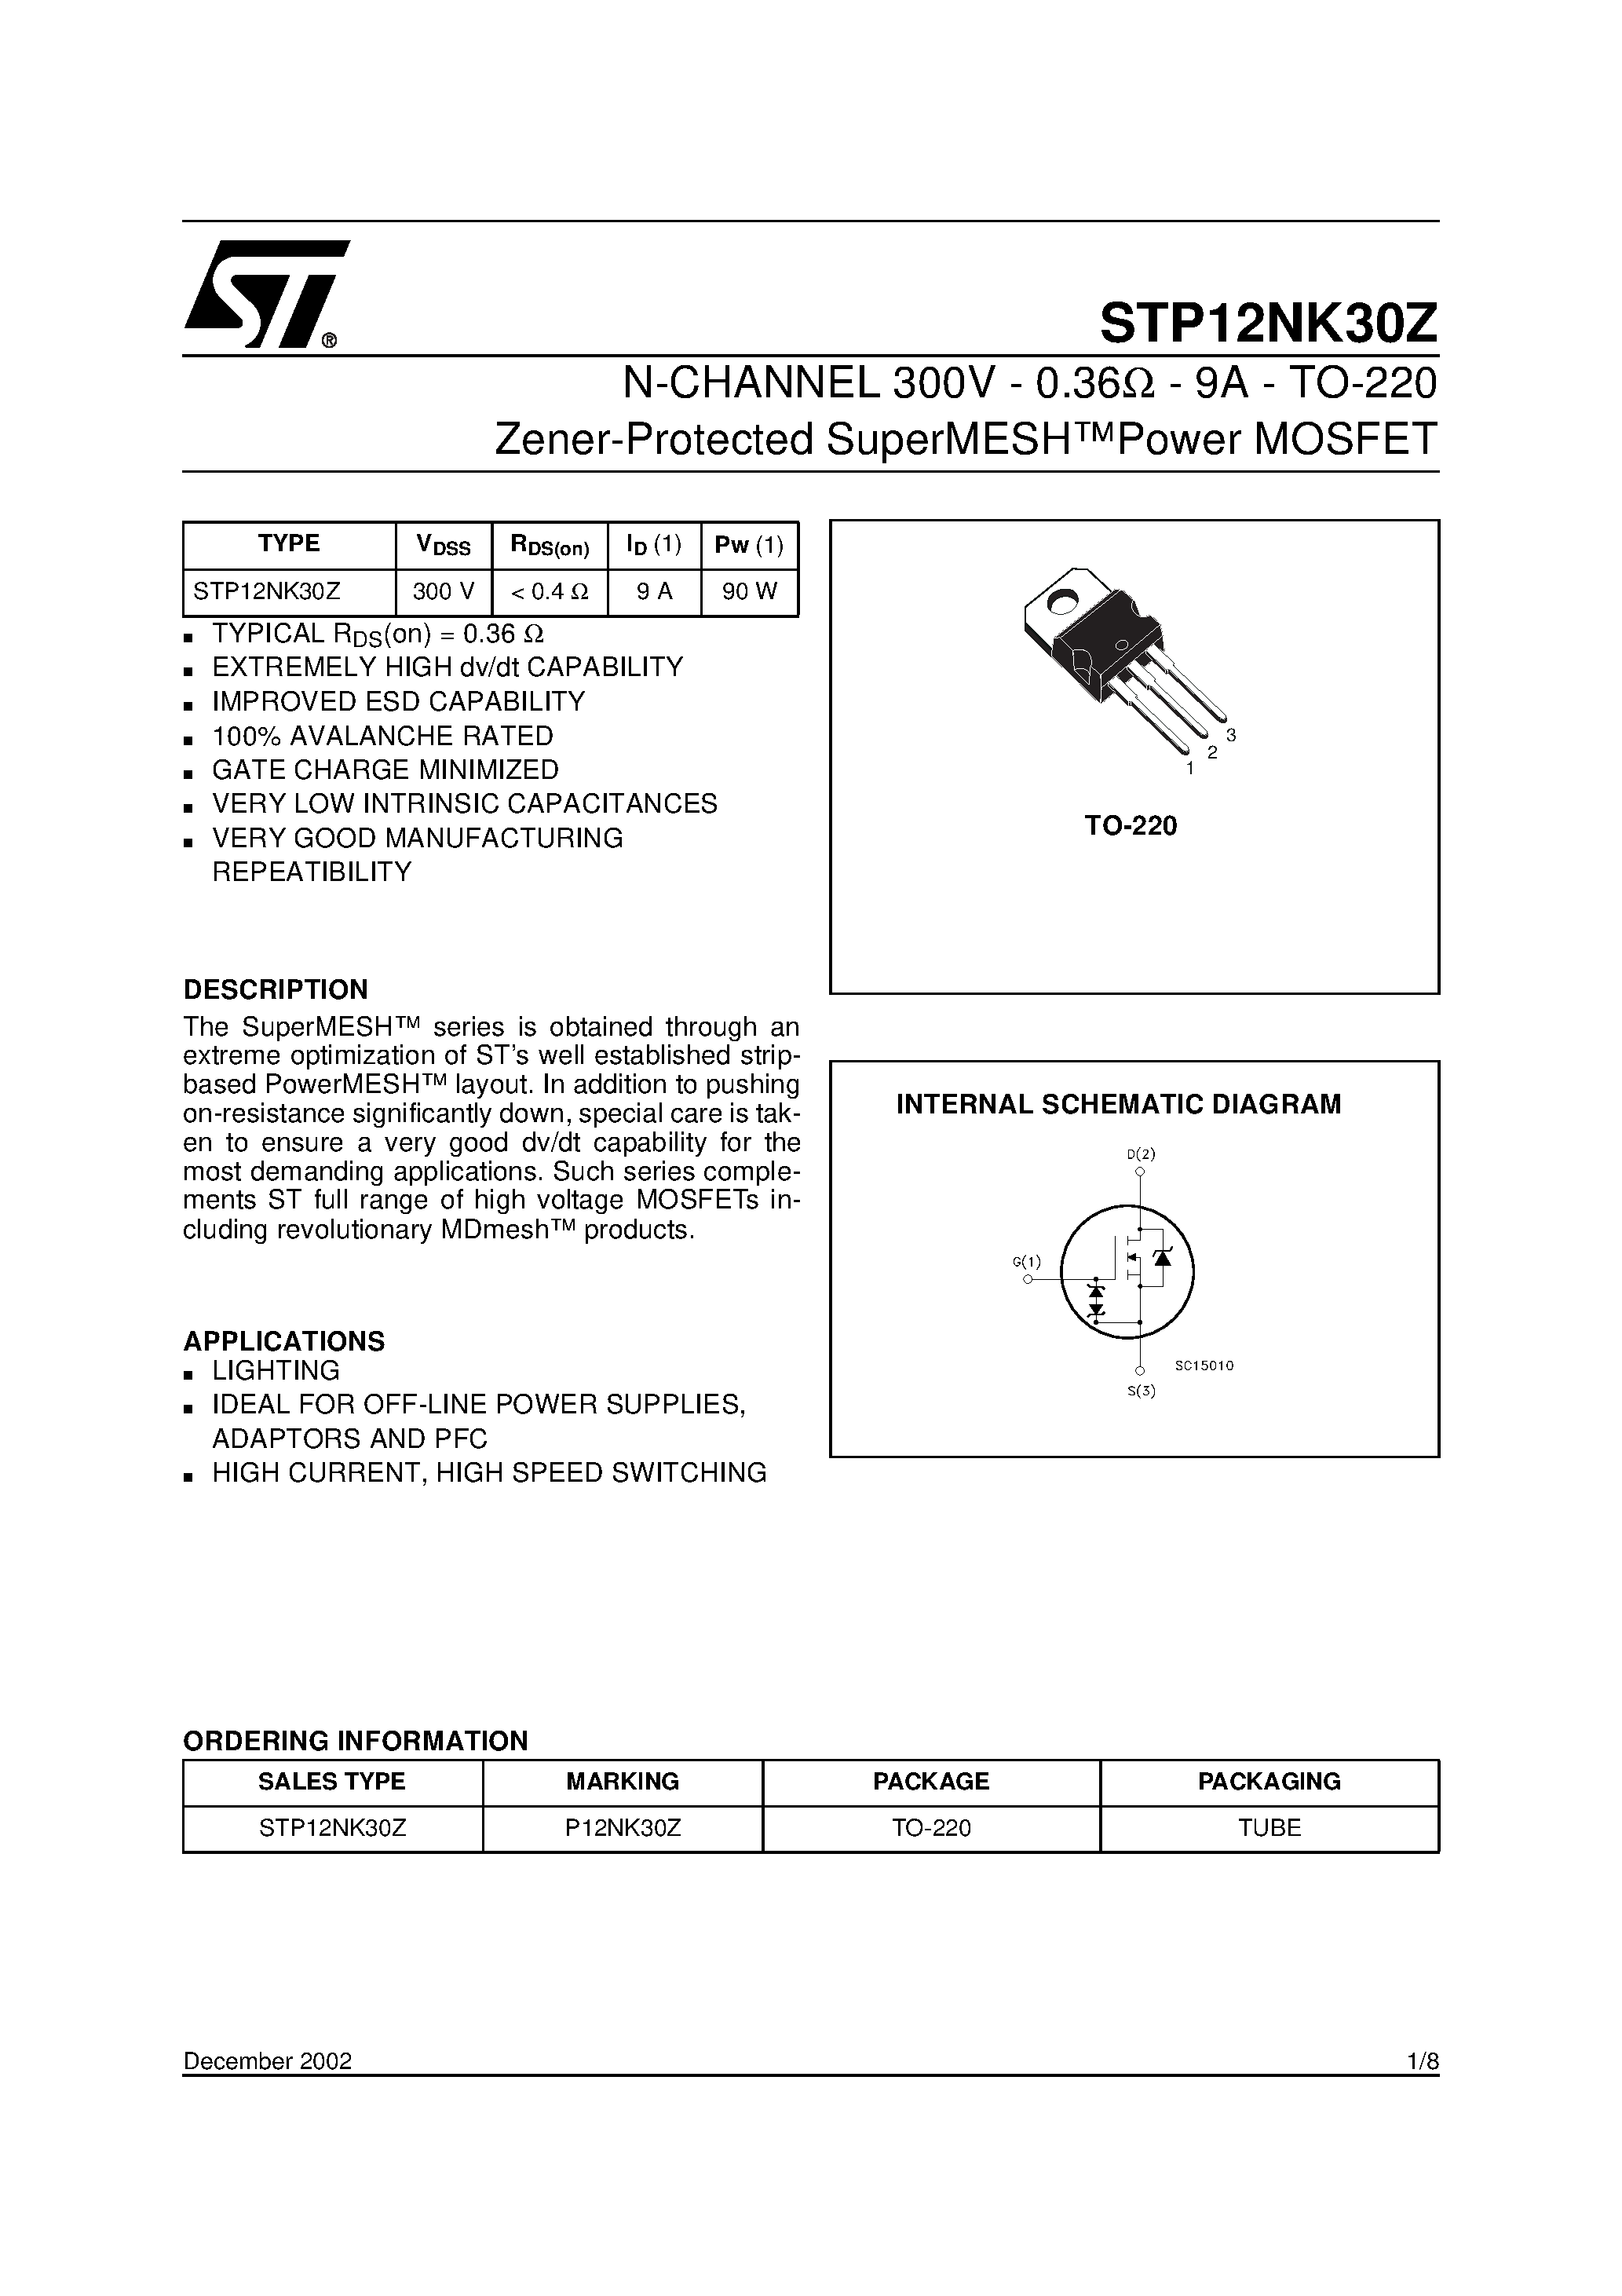 Datasheet STP12NK30Z - N-CHANNEL 300V - 0.36ohm - 9A - TO-220 Zener-Protected SuperMESH Power MOSFET page 1